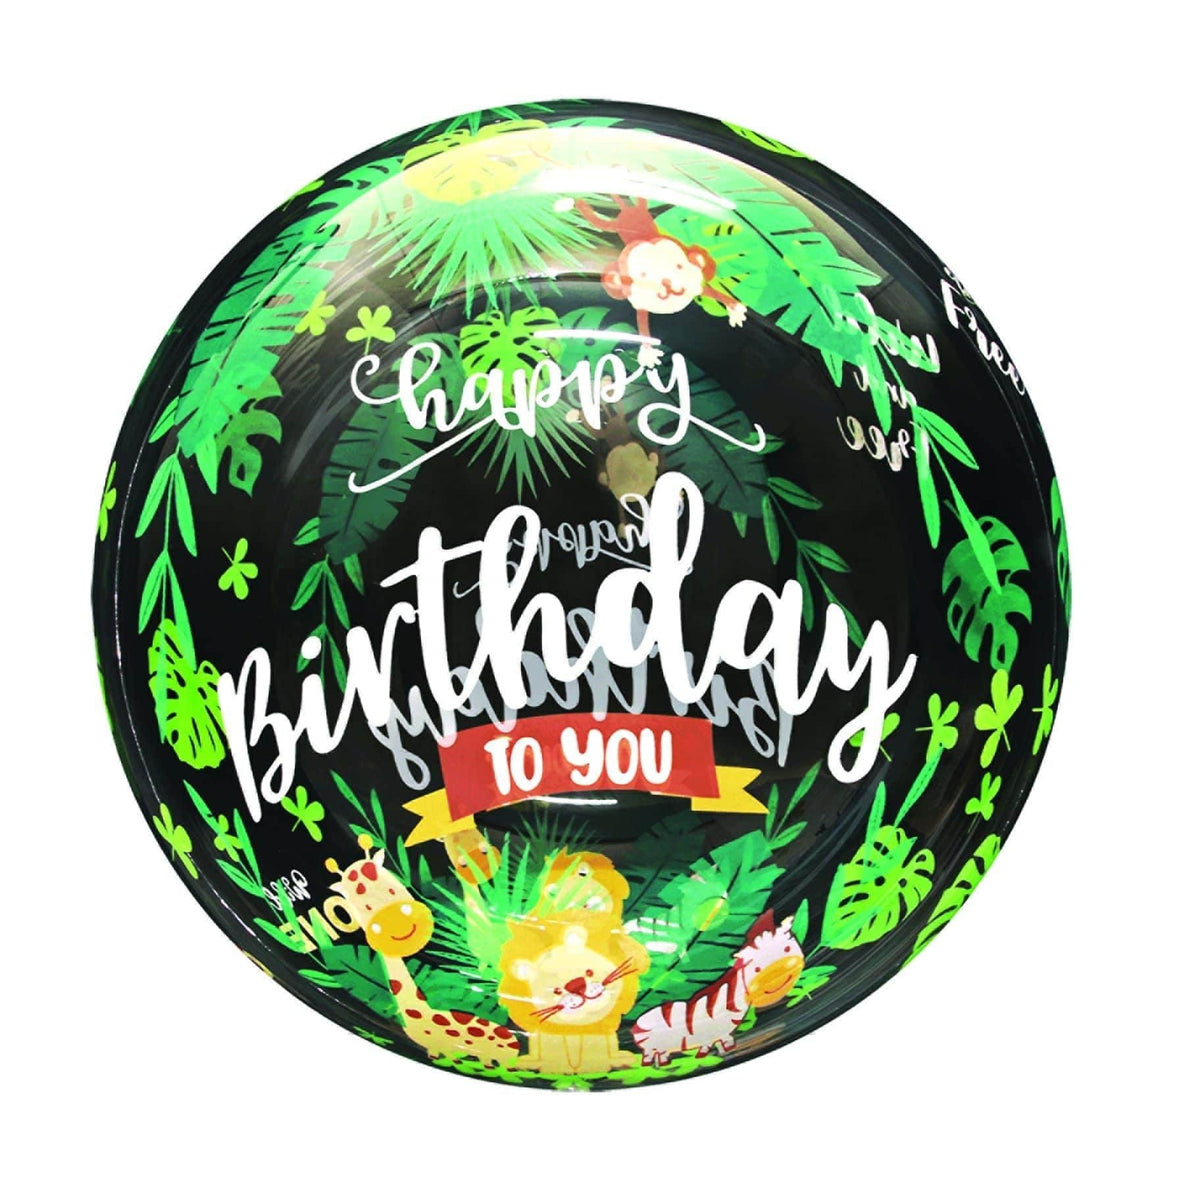 Buy Balloons HD Bubble Balloon, HBD Safari, 20 Inches sold at Party Expert